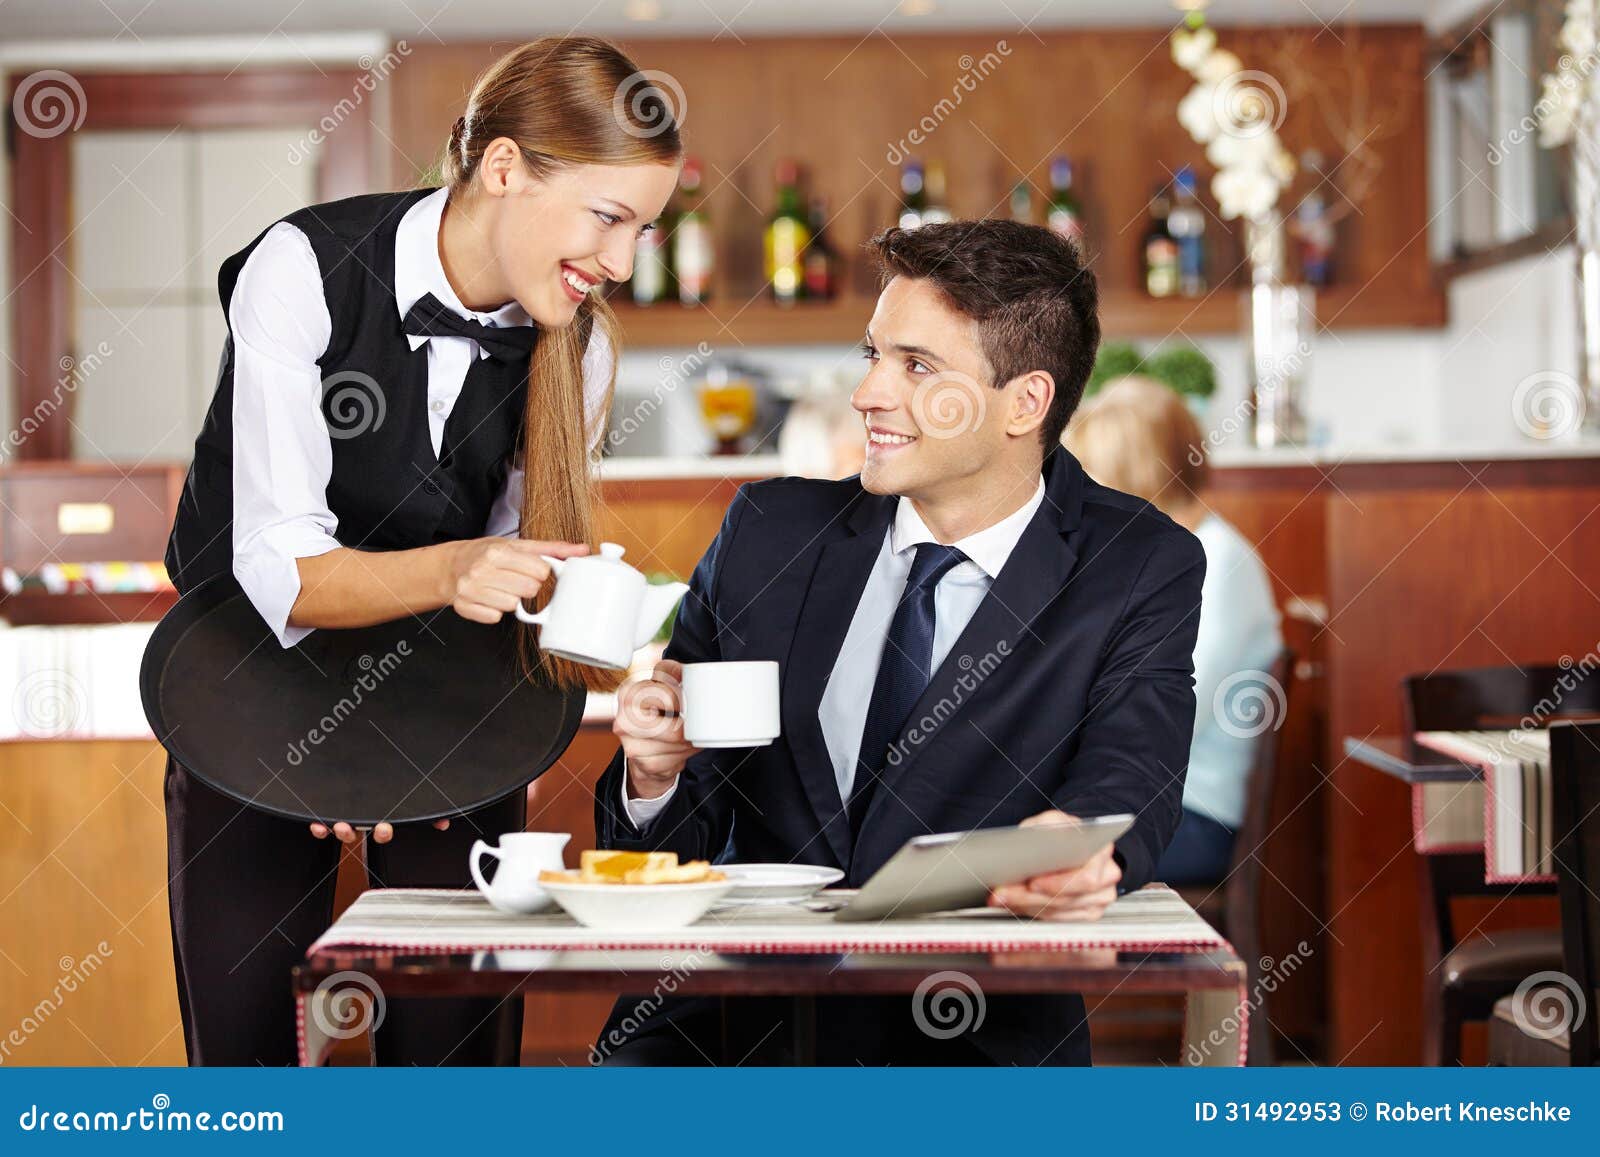 Man in Coffee Shop Flirting with Waiter Stock Image photo